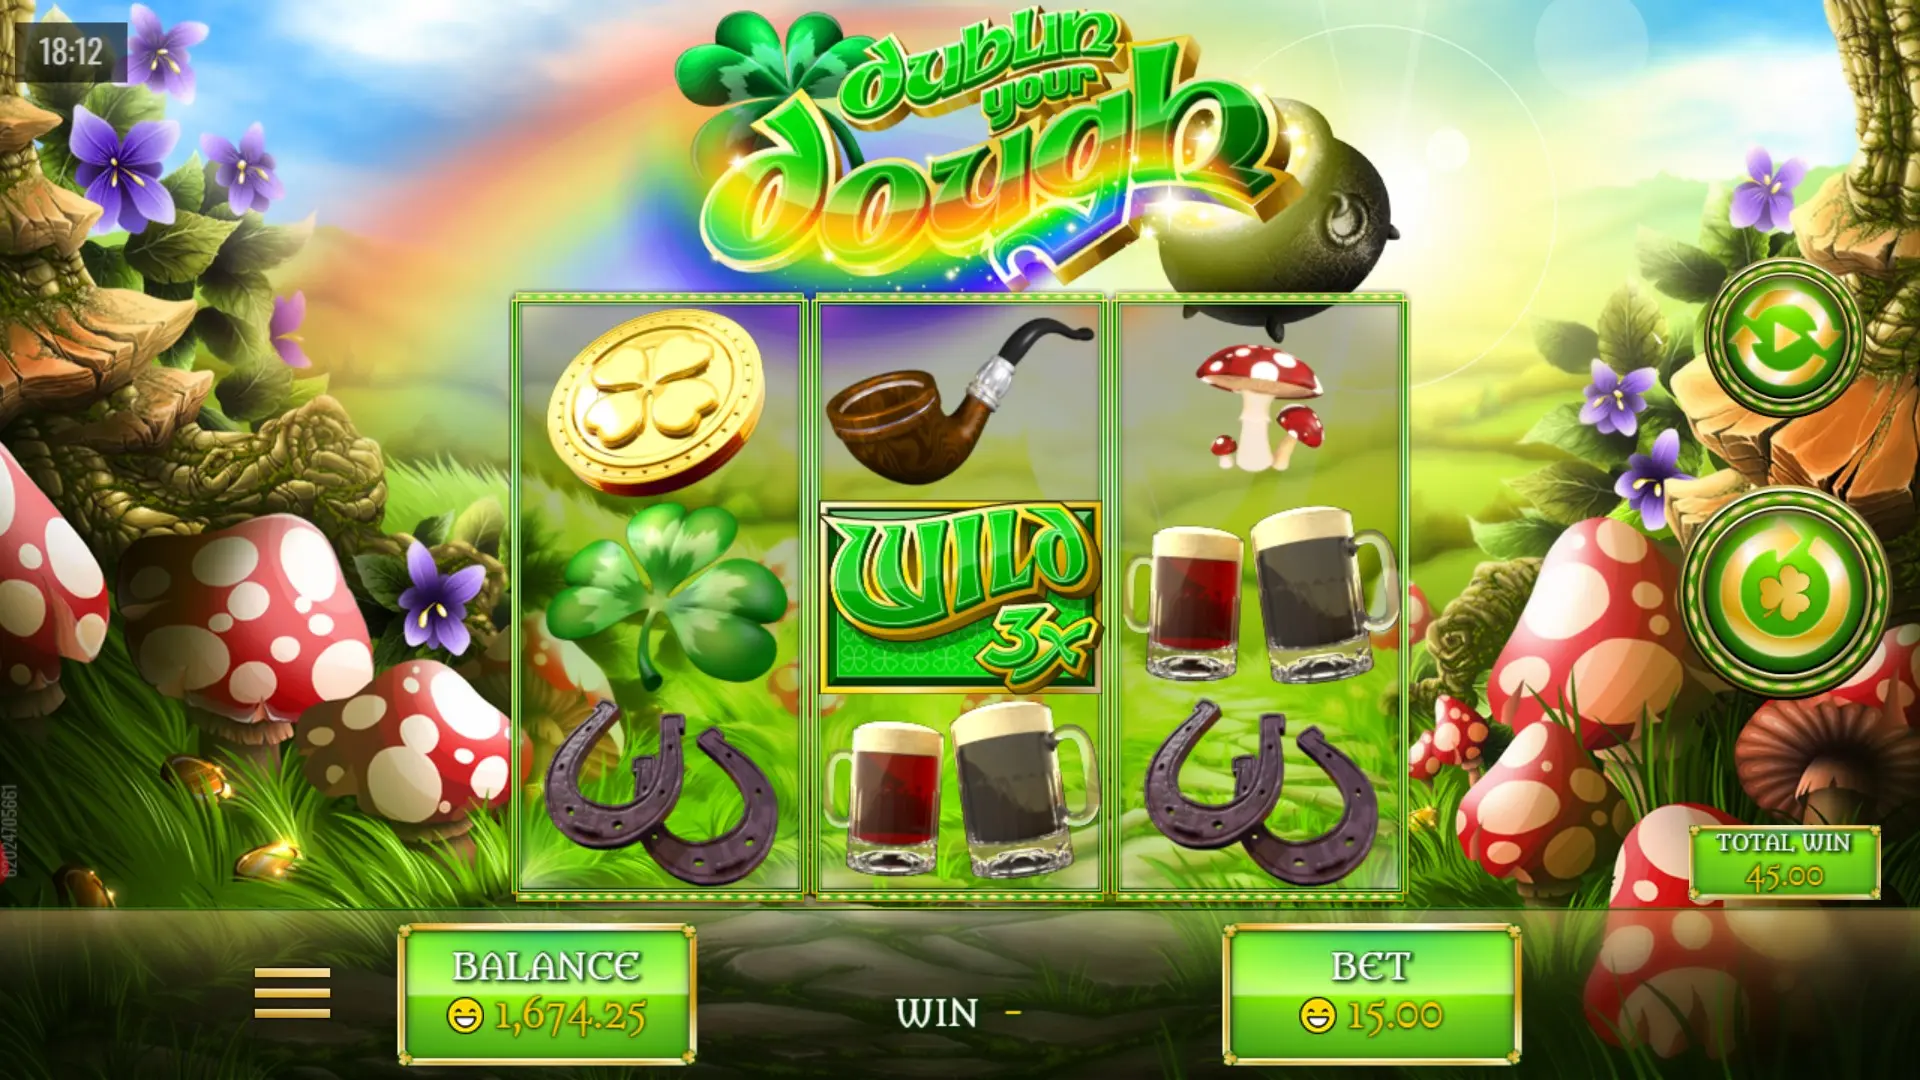 20 Free Spins on Dublin Your Dough at Desert Nights Casino